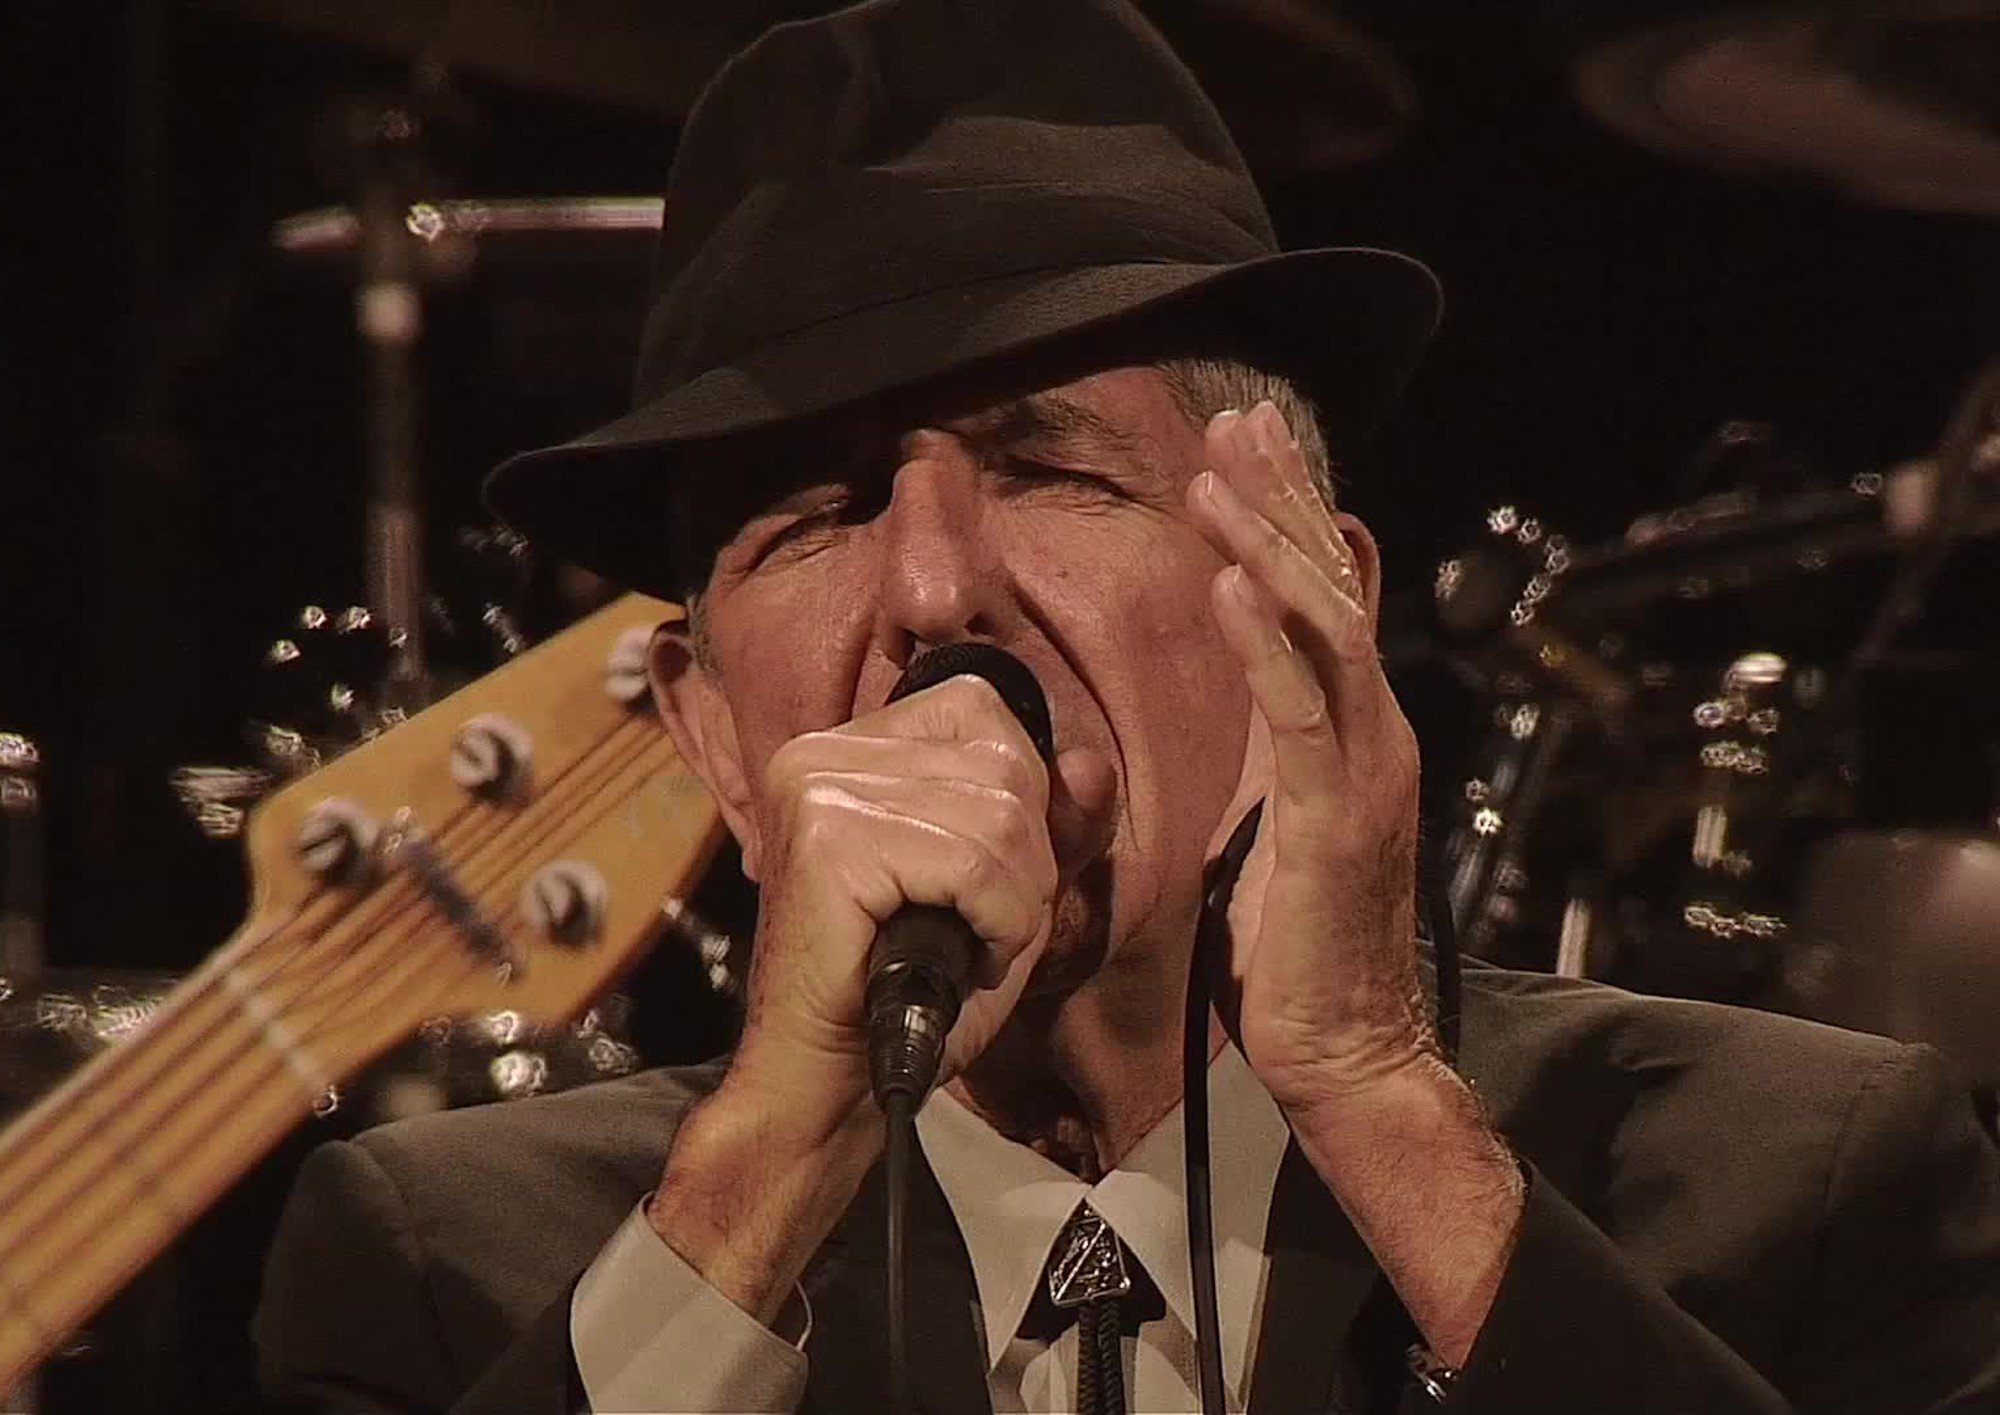 Leonard Cohen singing into a microphone with eyes shut and wearing a hat.